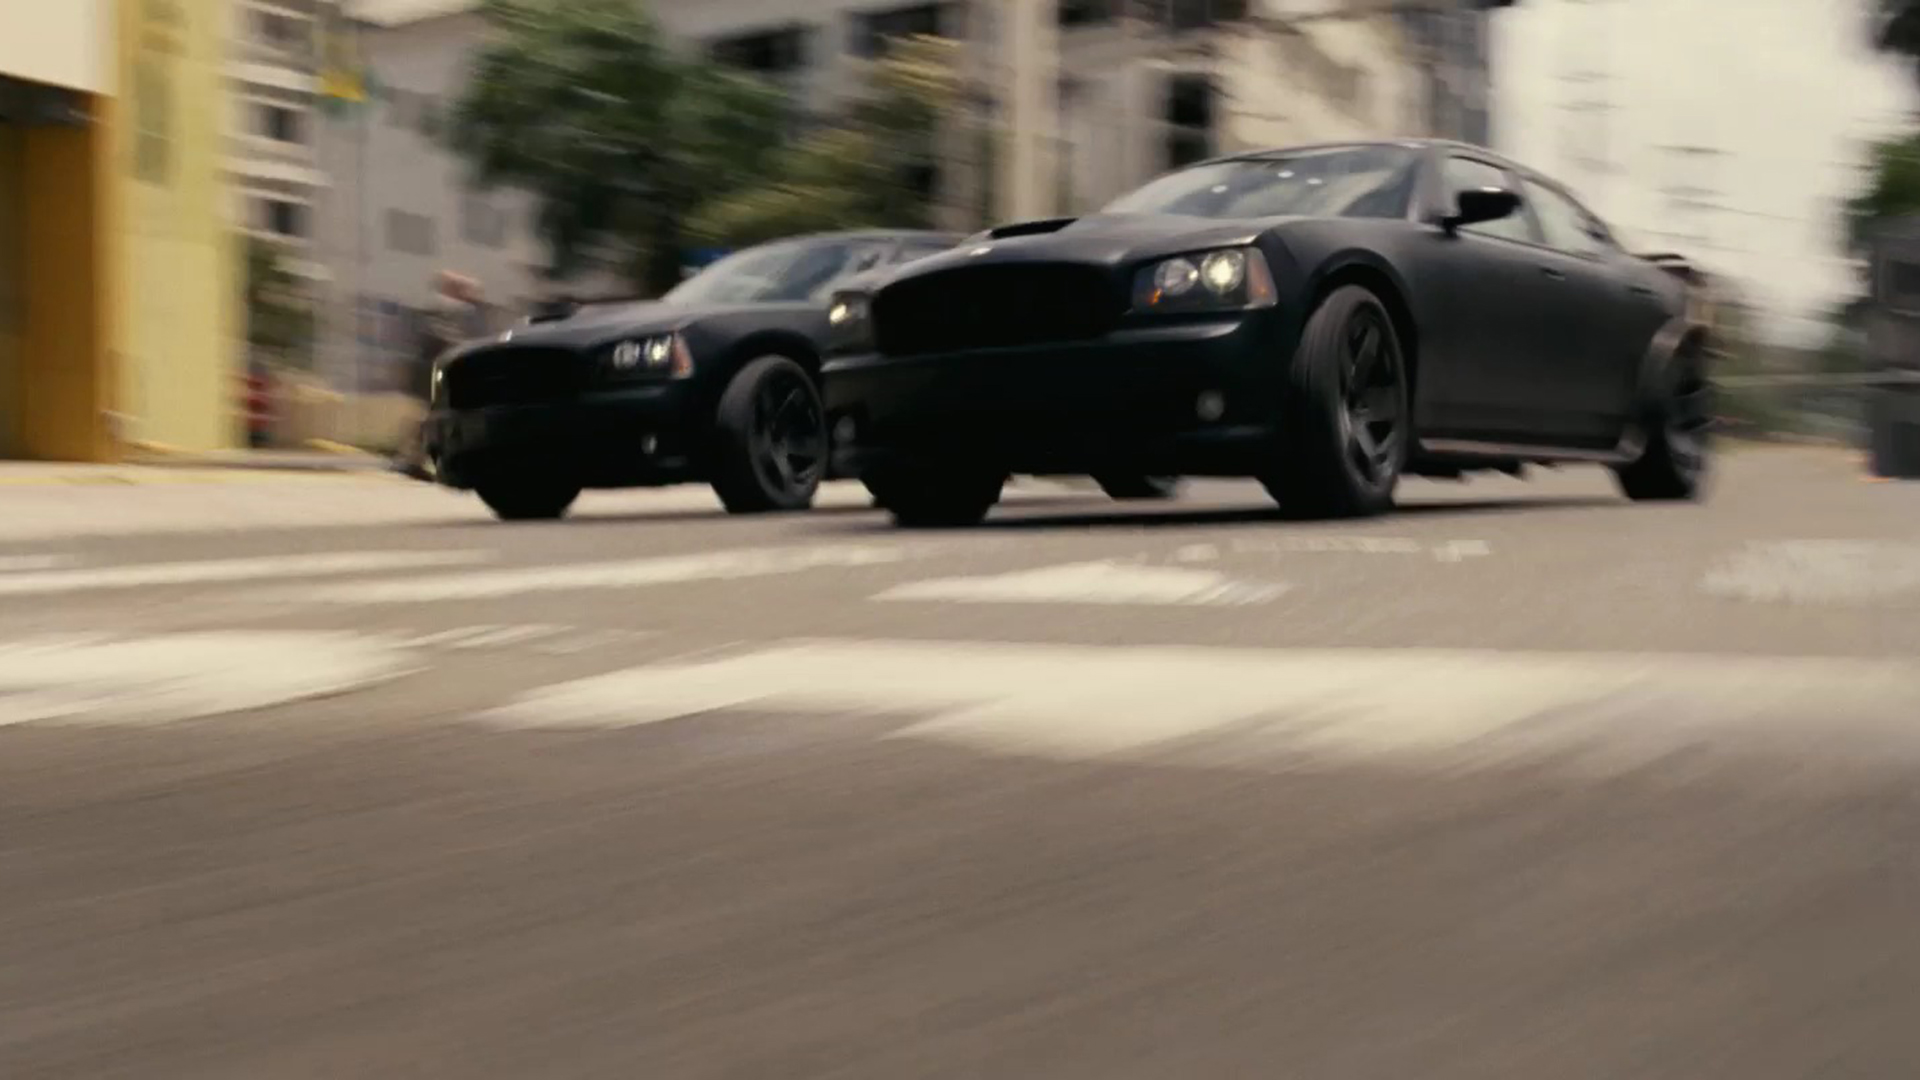 Dodge Charger Fast and Furious 5 Cars, dodge charger wallpaper